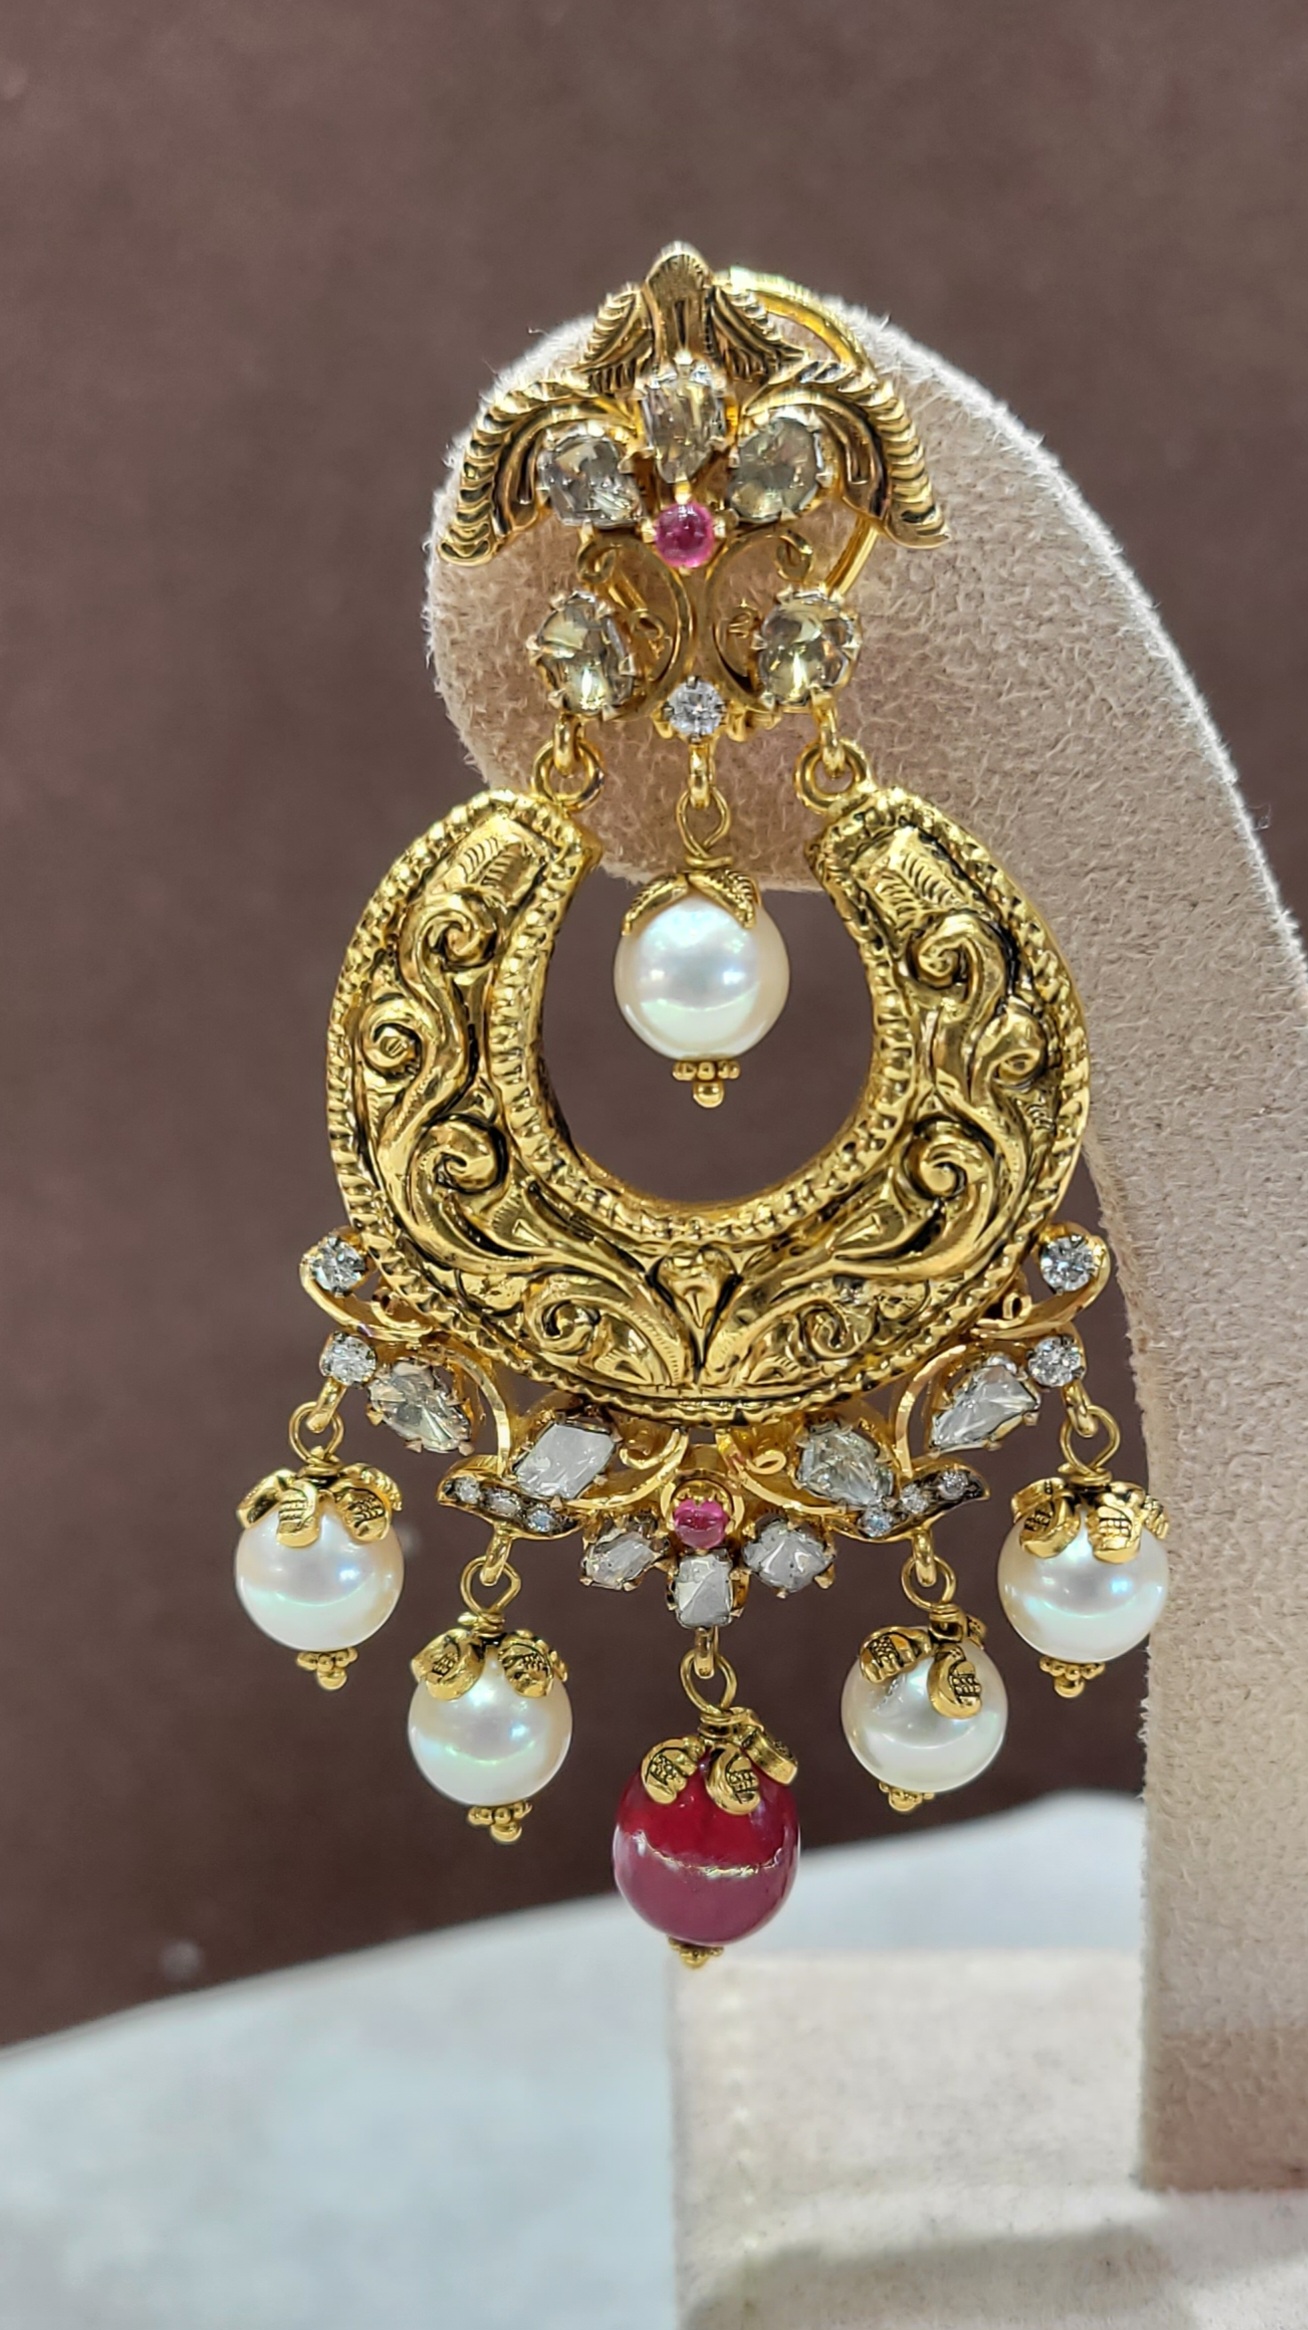 Temple Gold Earrings with Natural Rubies and South Sea Pearls.